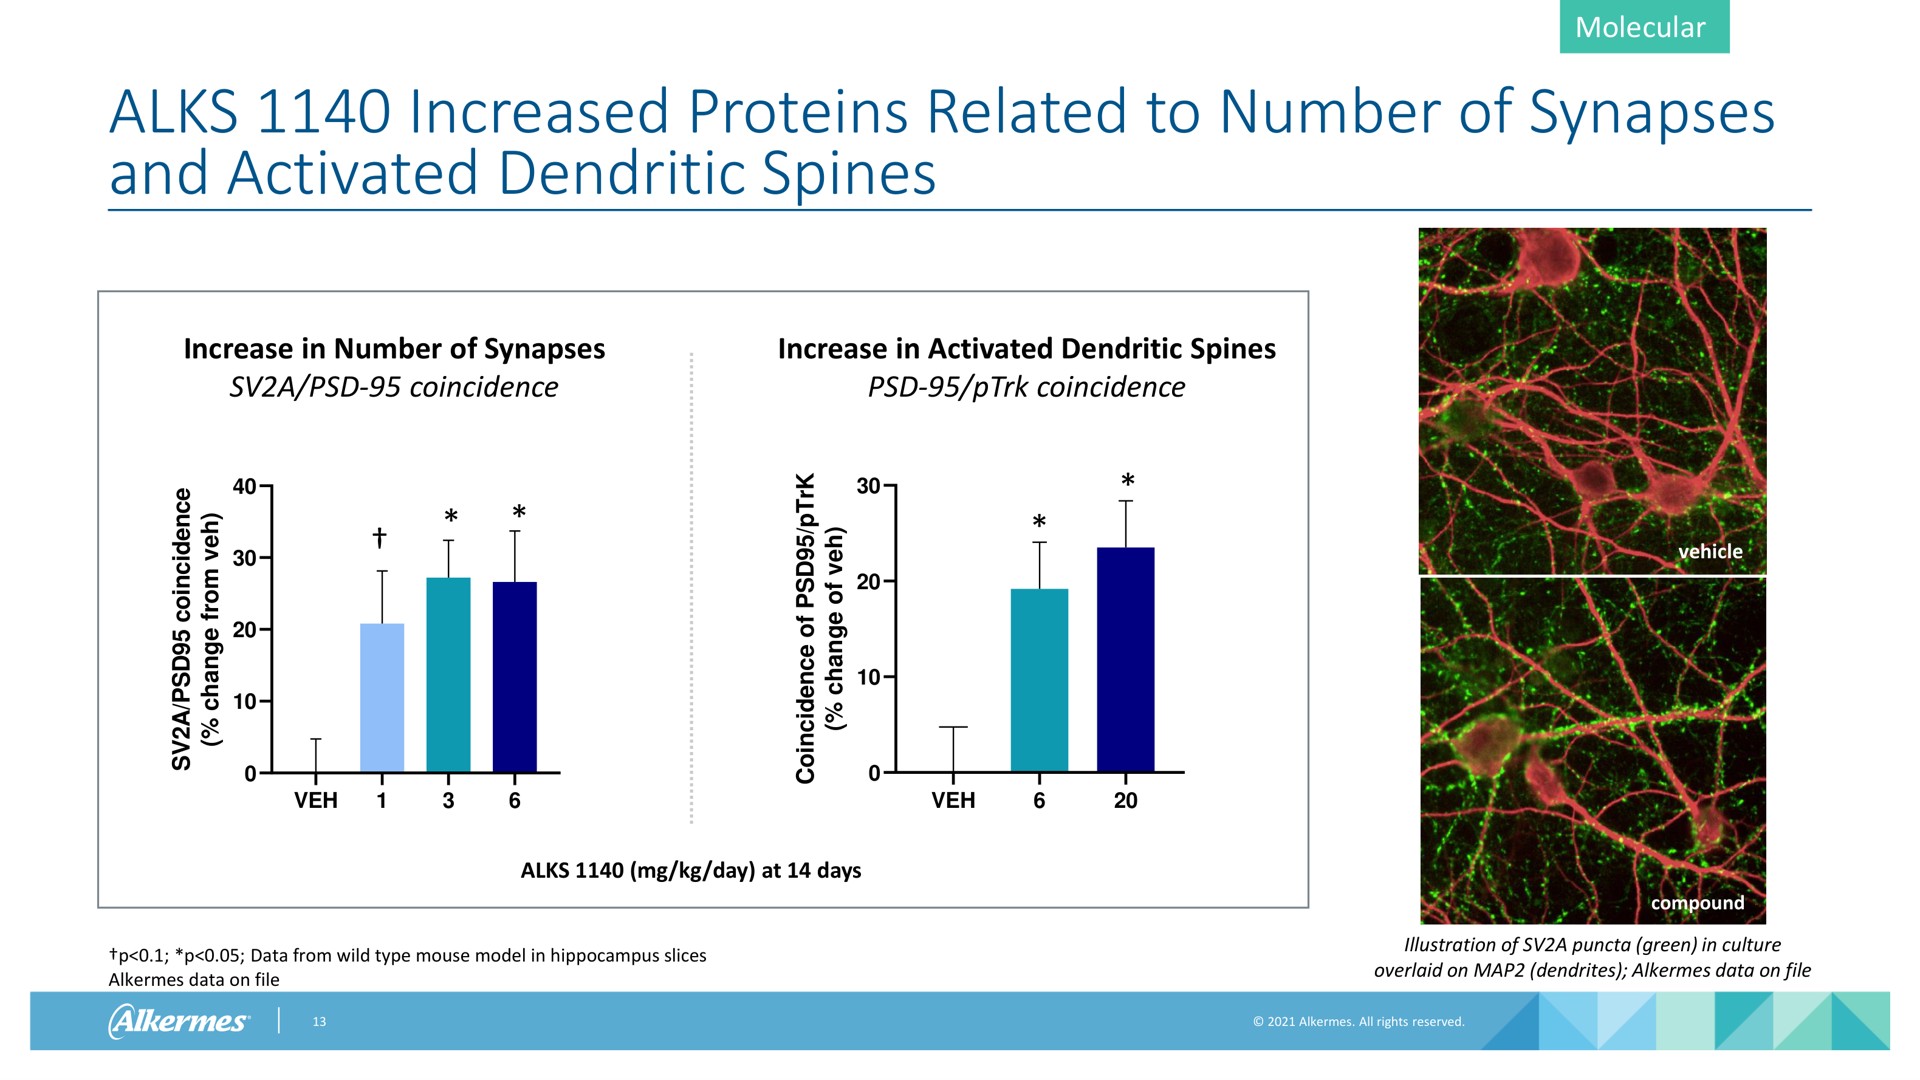 increased proteins related to number of synapses and activated dendritic spines molecular increase in number of synapses a coincidence increase in activated dendritic spines coincidence vehicle day at days data from wild type mouse model in hippocampus slices alkermes data on file compound illustration of a green in culture overlaid on map dendrites alkermes data on file i as a | Alkermes